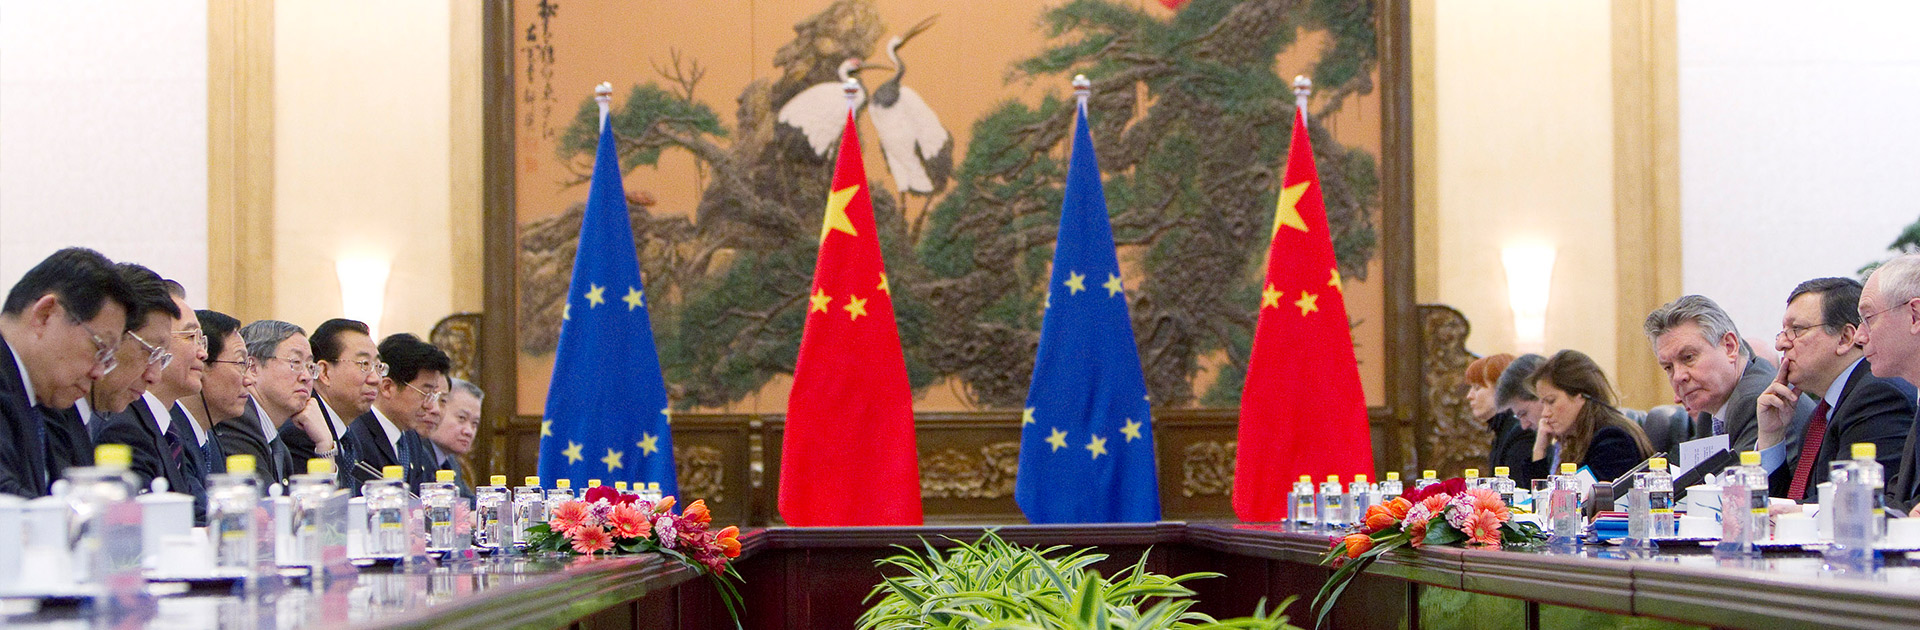 Modest Proposal: Focus US-EU Cooperation on Handling China’s Technological Rise